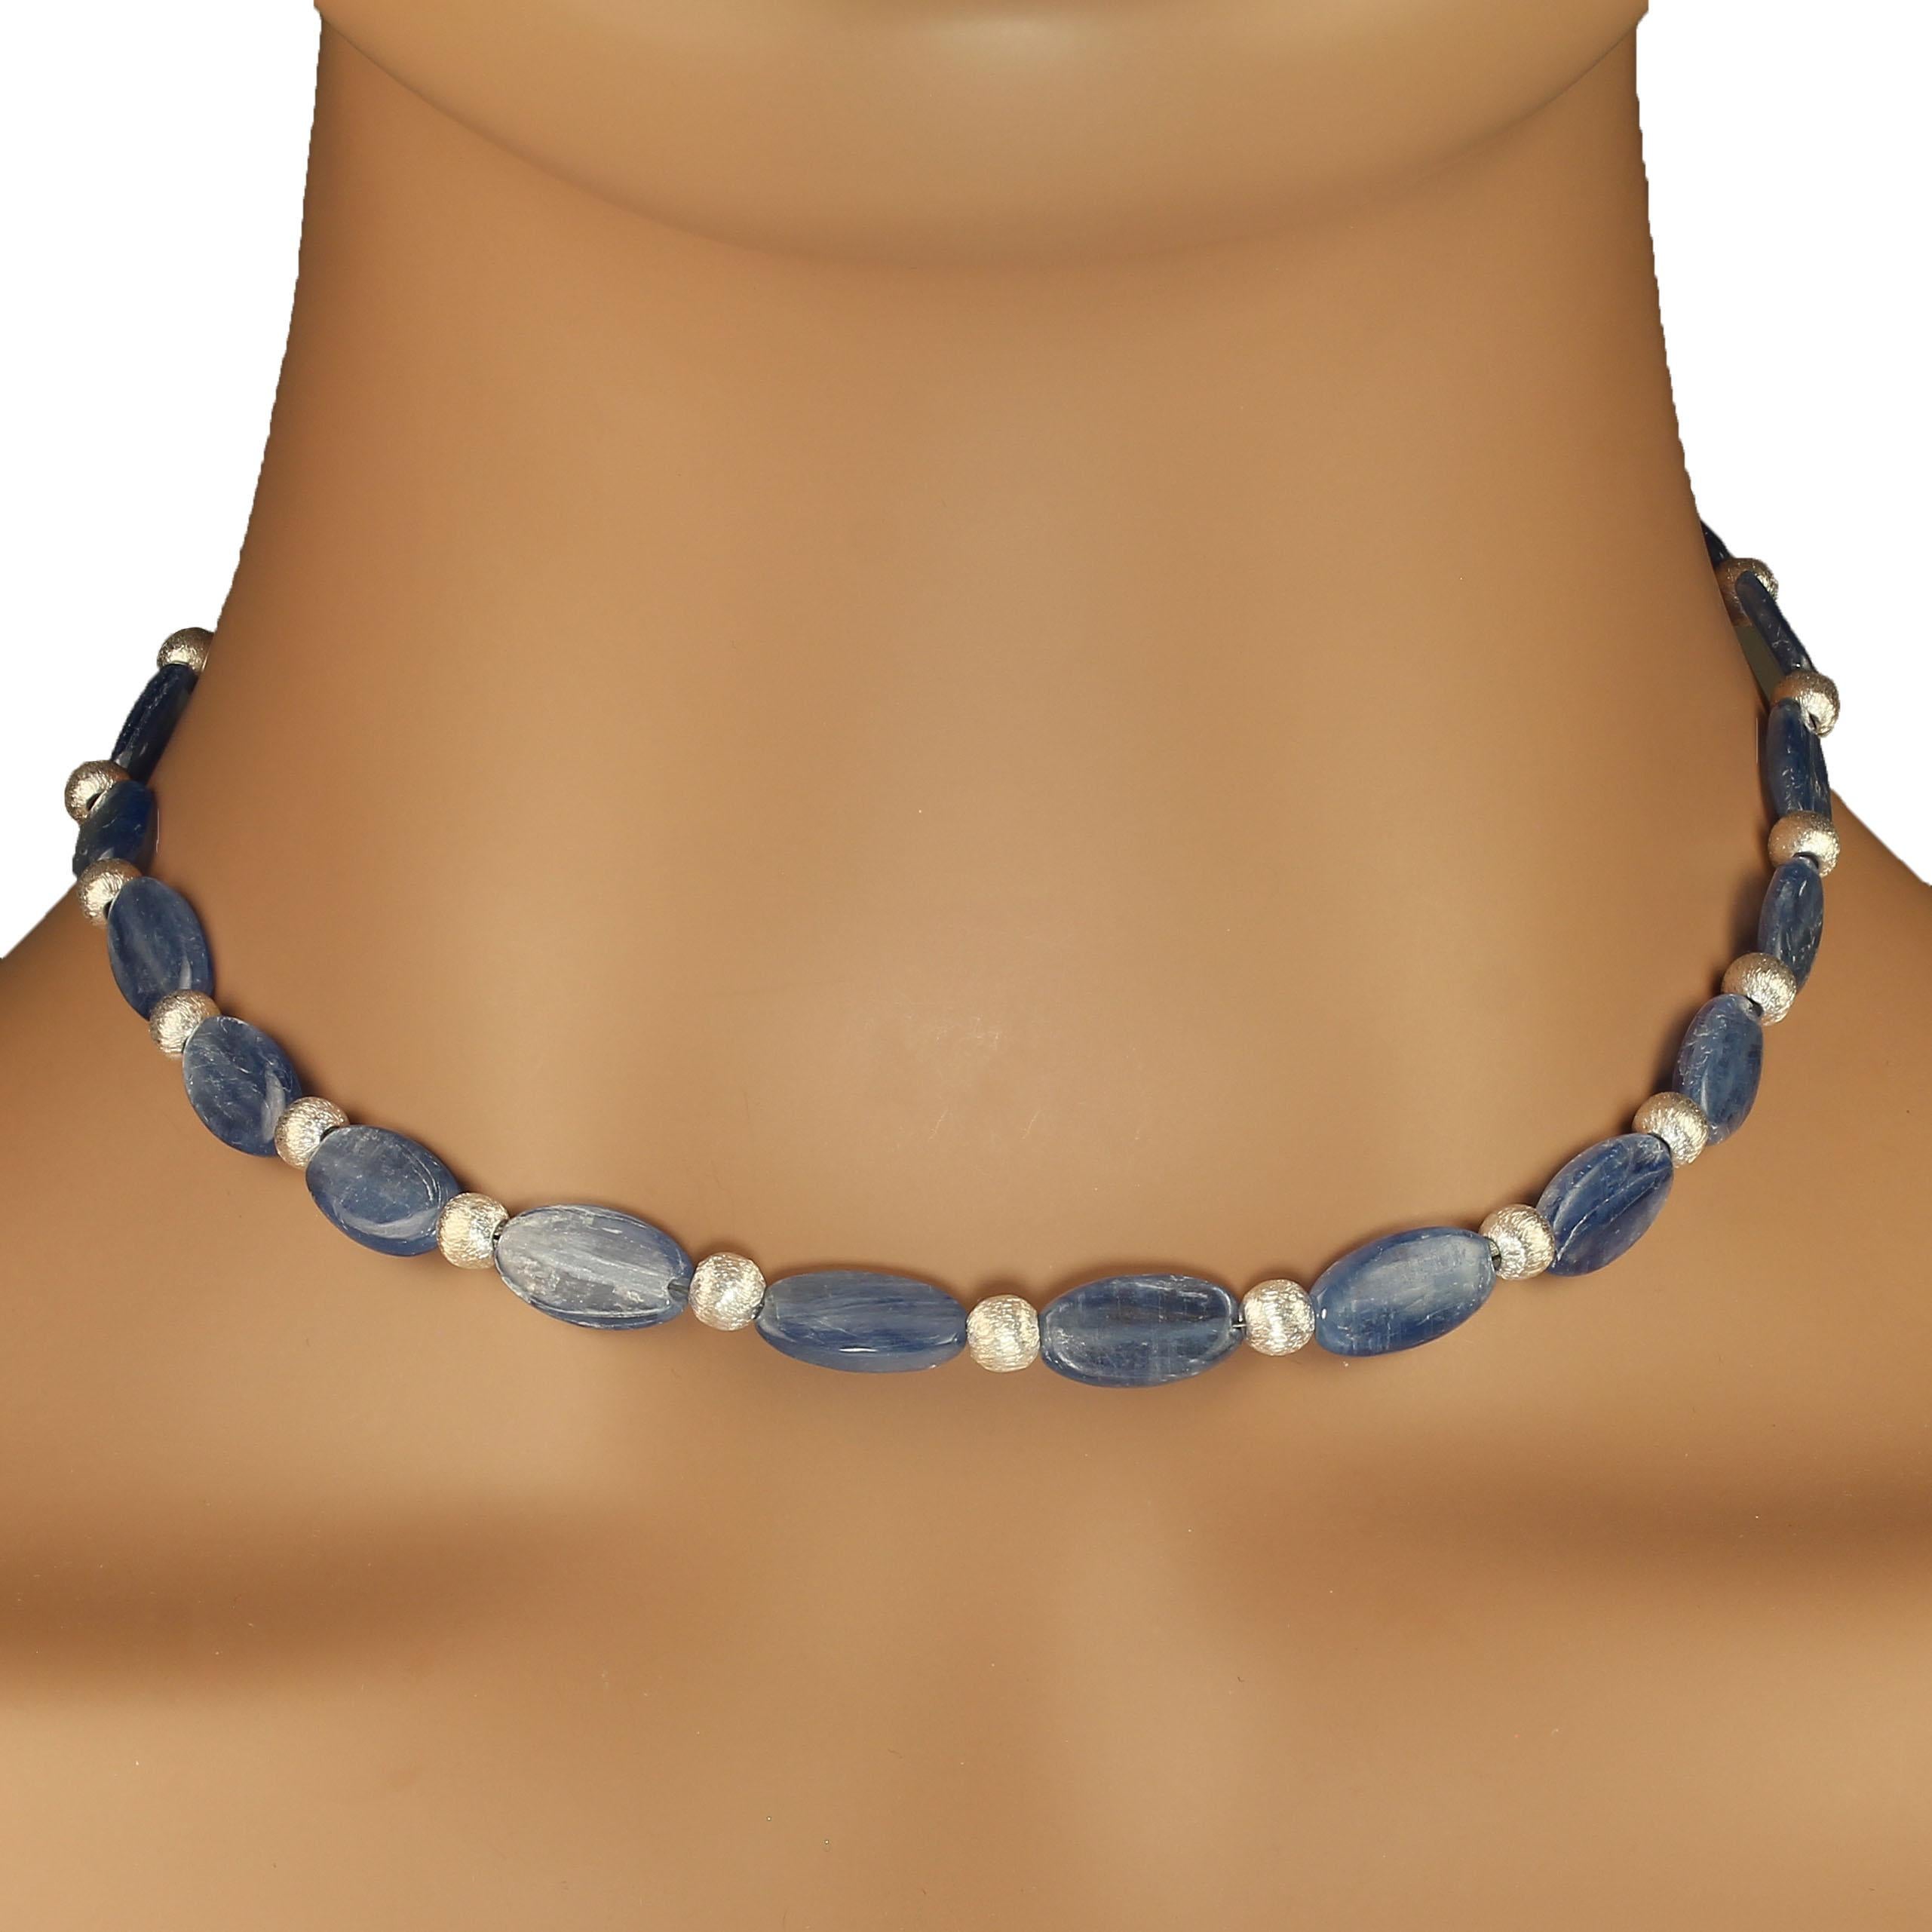 AJD 15 Inch Choker of Blue Oval Kyanite and silver beads     Perfect Gift